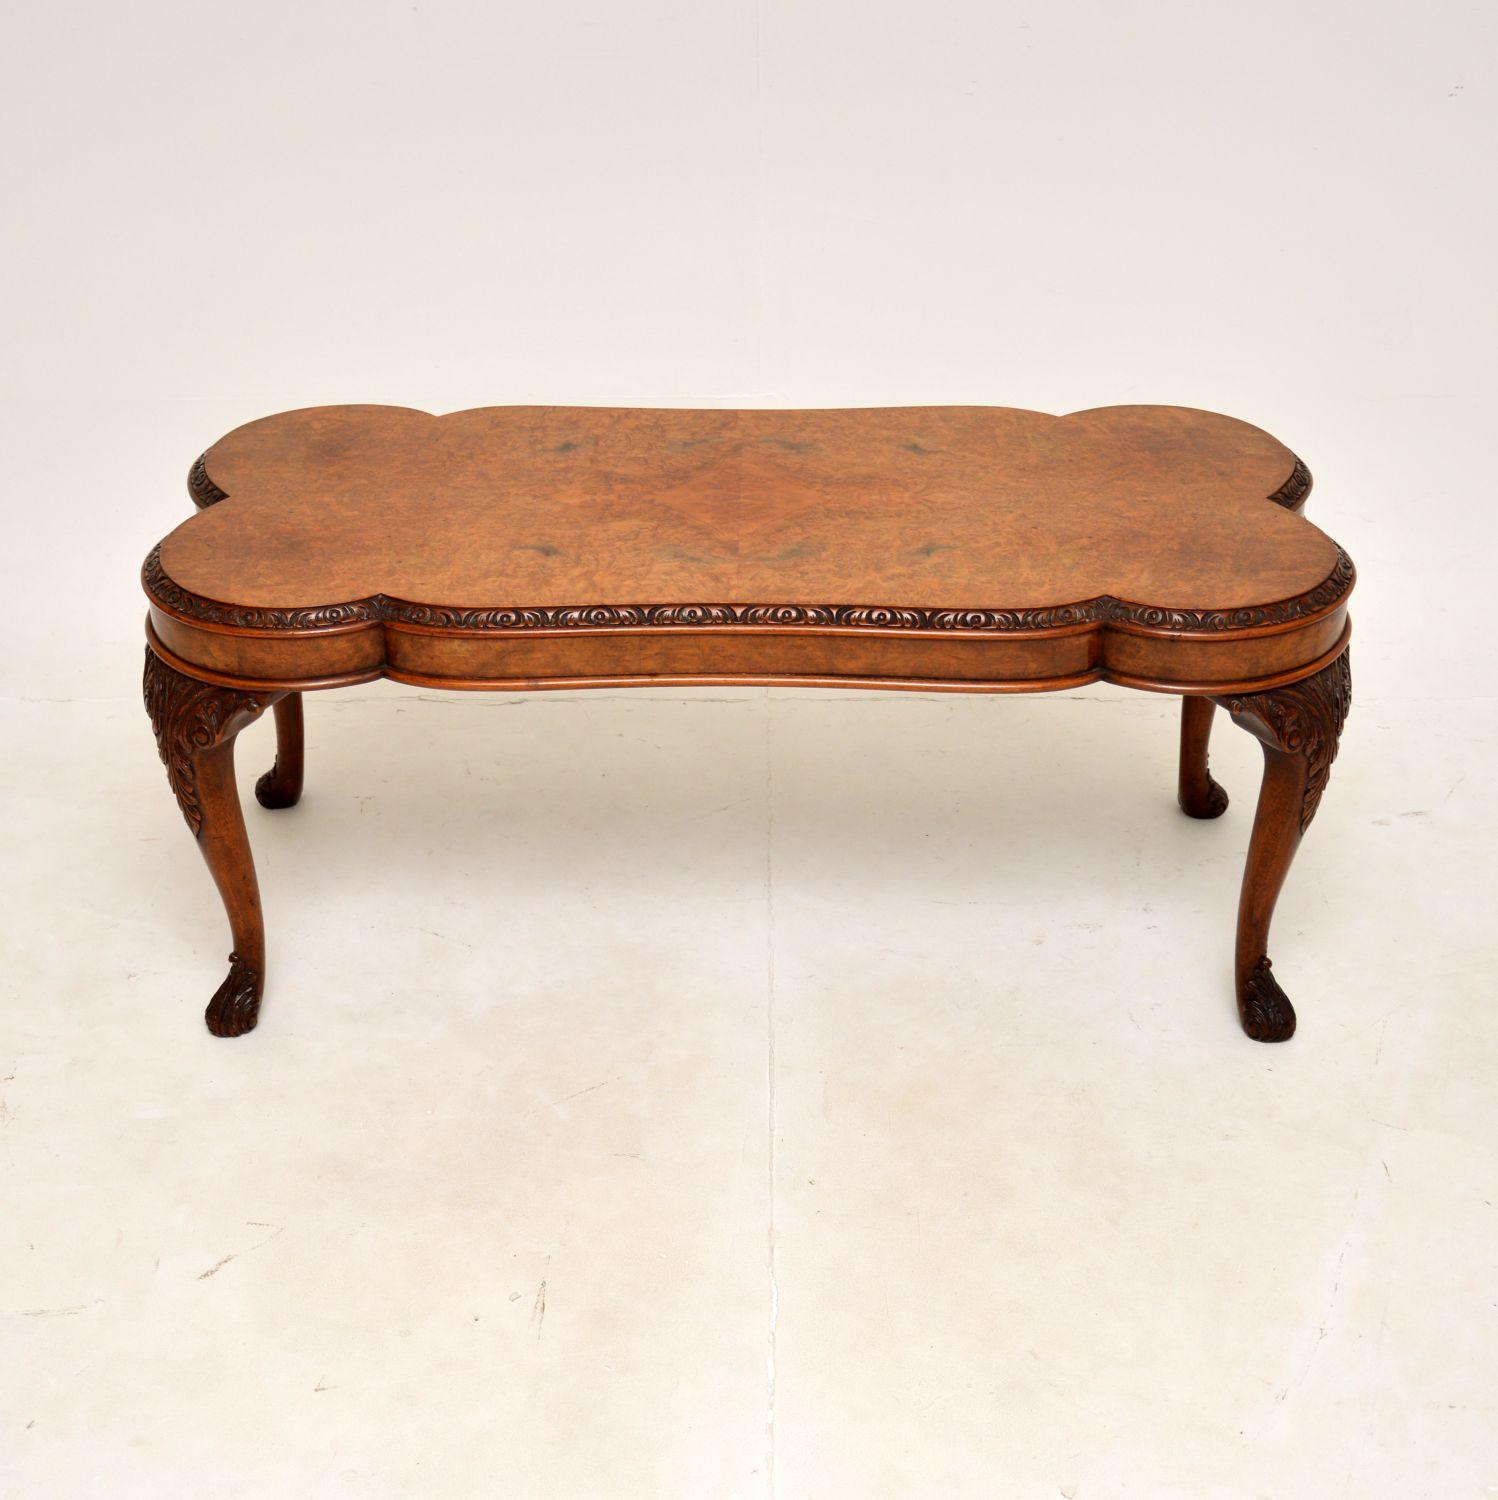 A stunning antique Queen Anne style burr walnut coffee table. This was made in England, it dates from around the 1930’s.

It is of amazing quality, the top has a gorgeous shape with curvaceous edges. The top edge is beautifully carved, there is also